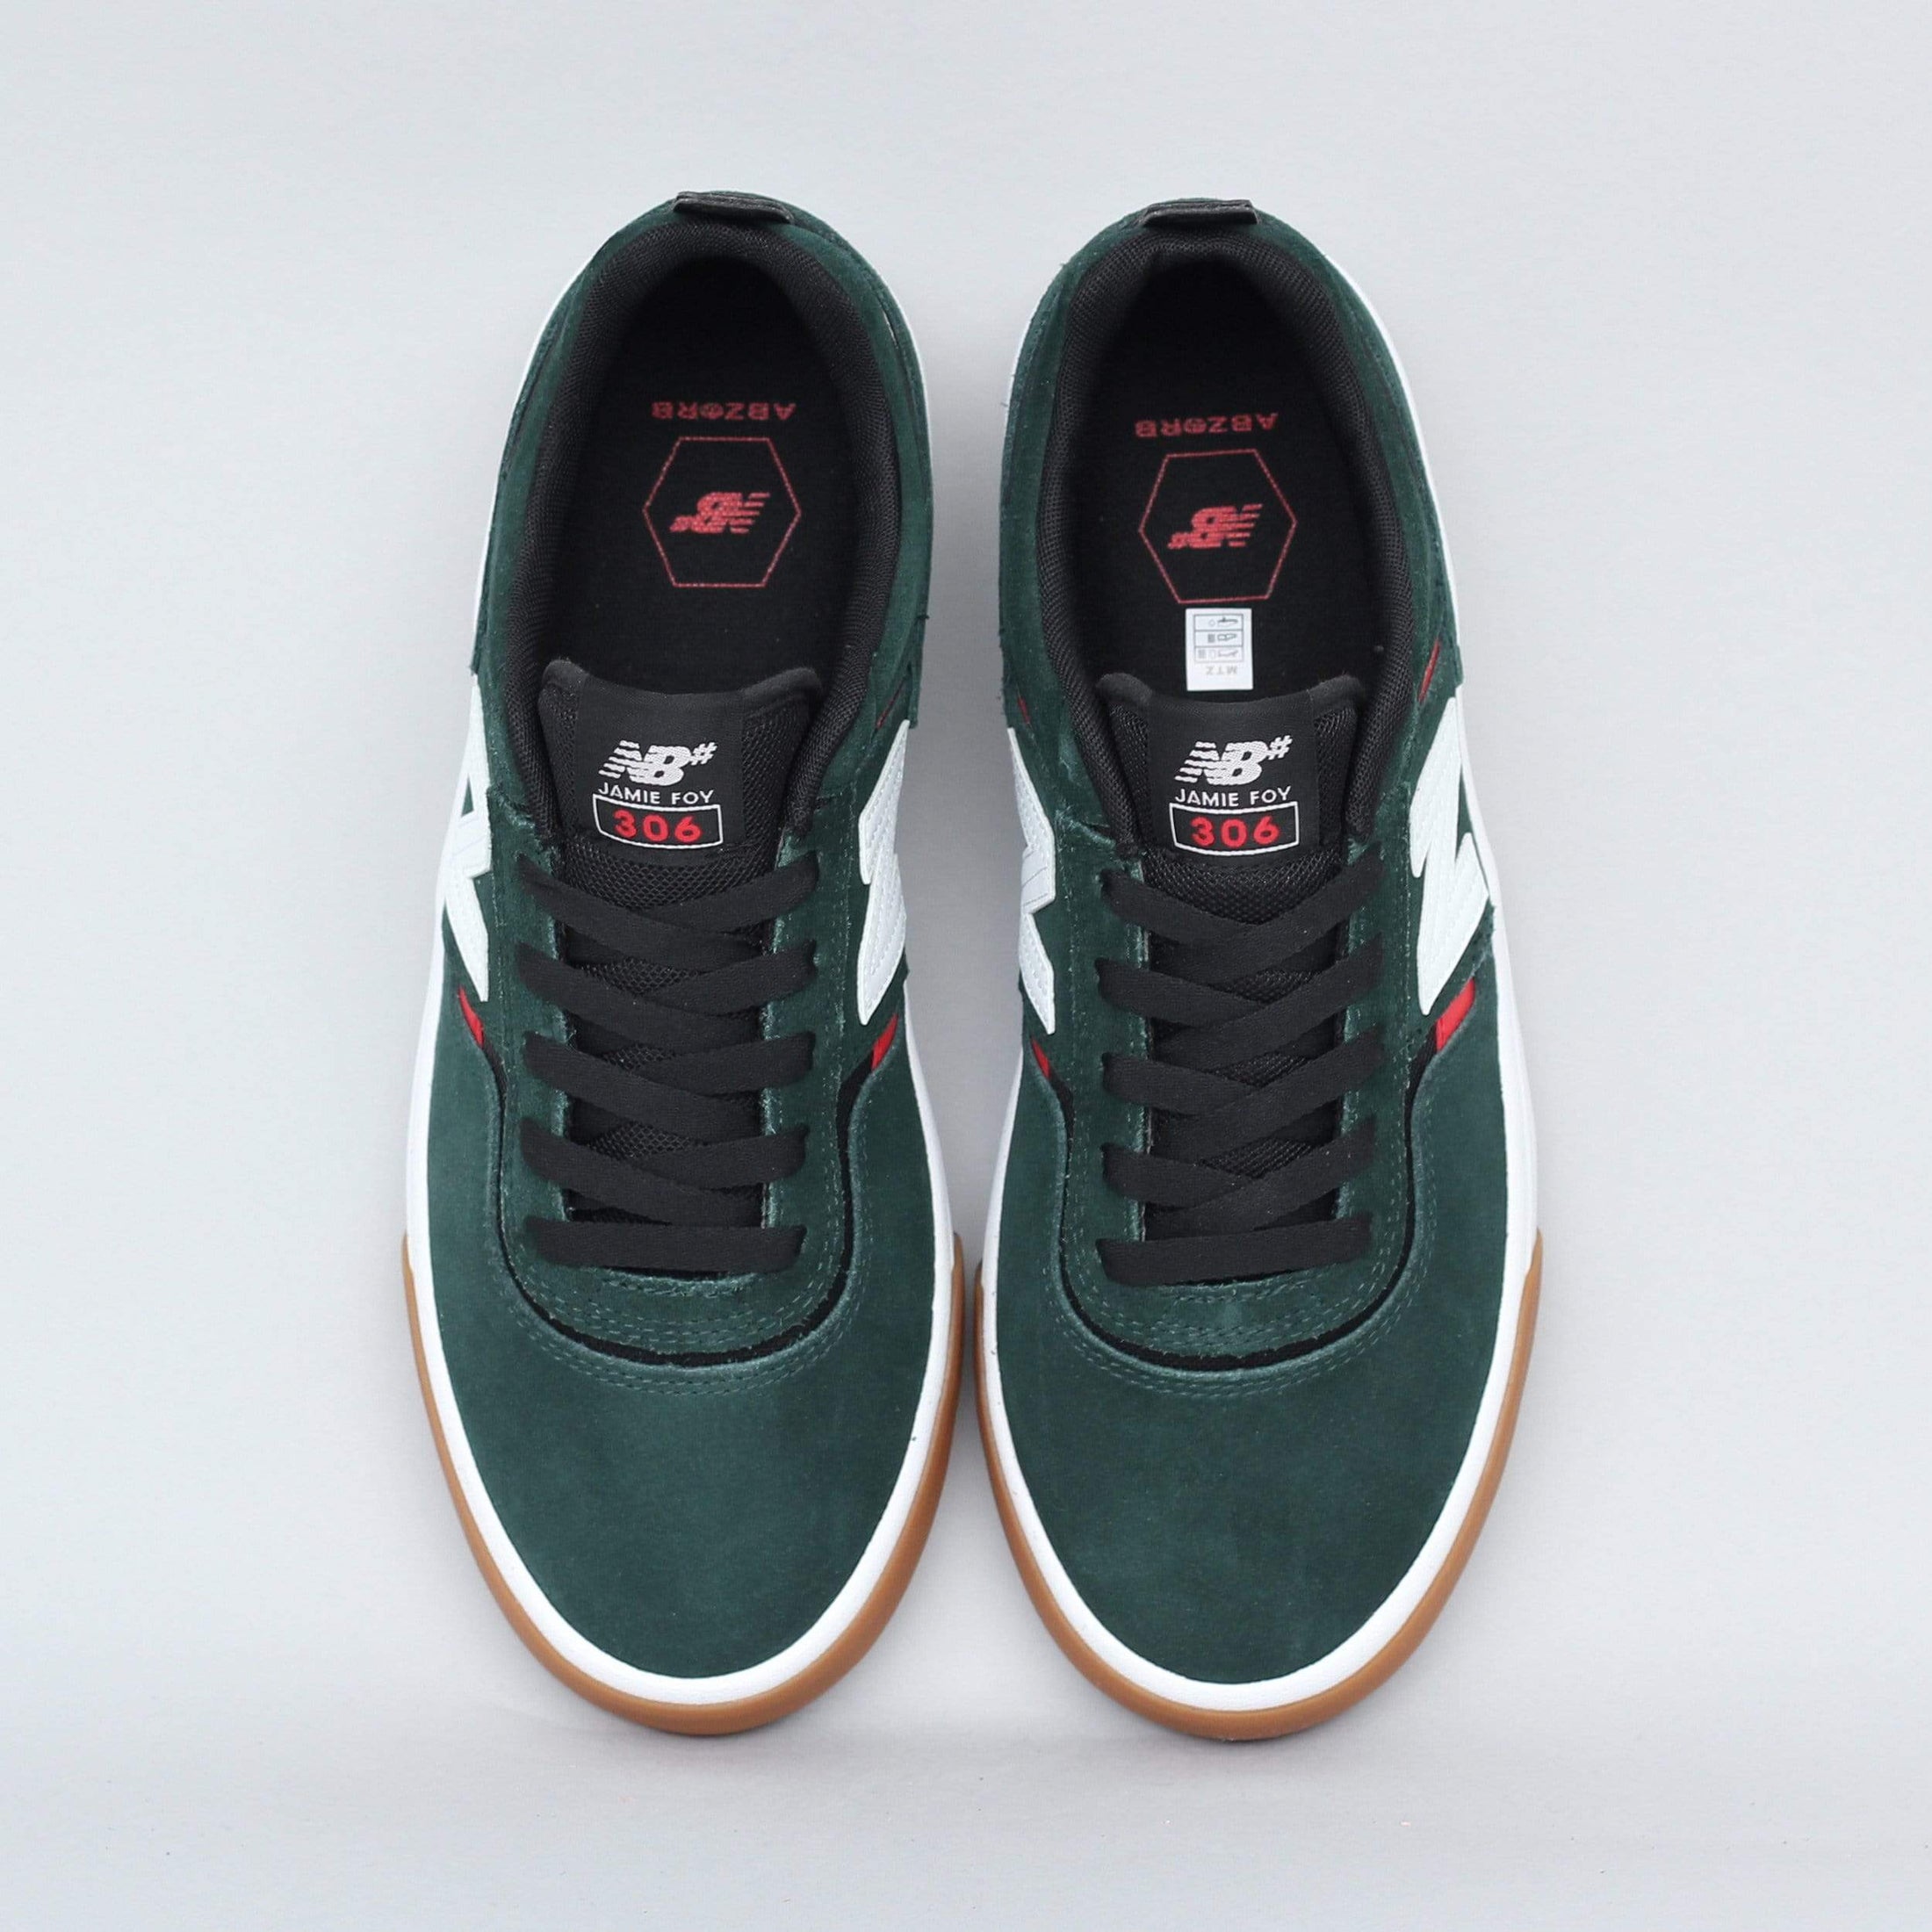 New Balance Numeric 306 Shoes Dark Green / Red